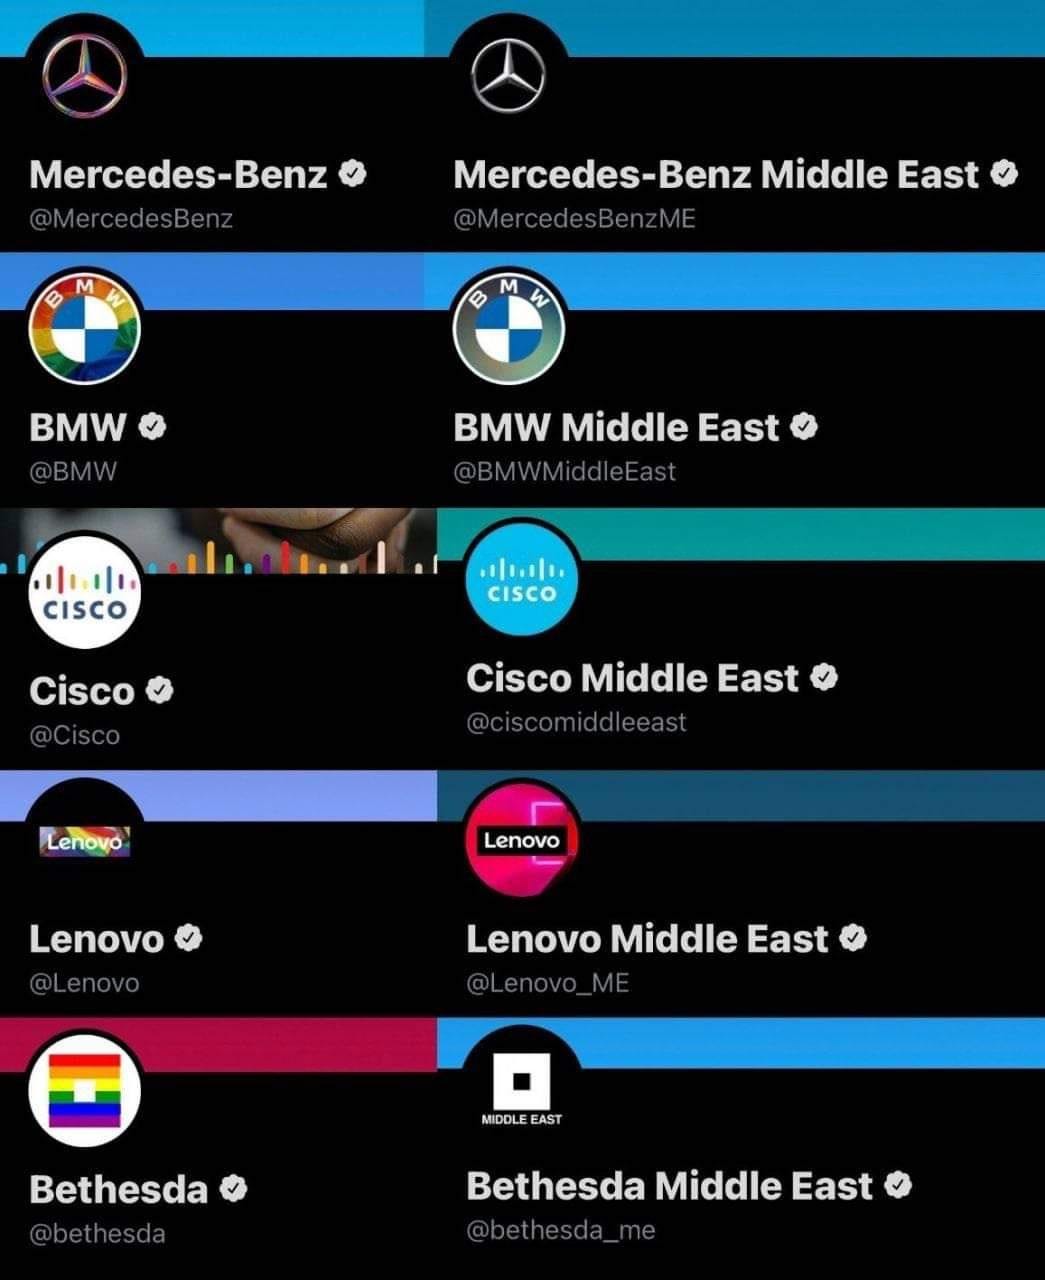 Multinational companies notably failed to update logos for "Pride Month" on  their Middle East and Asian pages, where LGBT people face the most  oppression - Mexico Daily Post